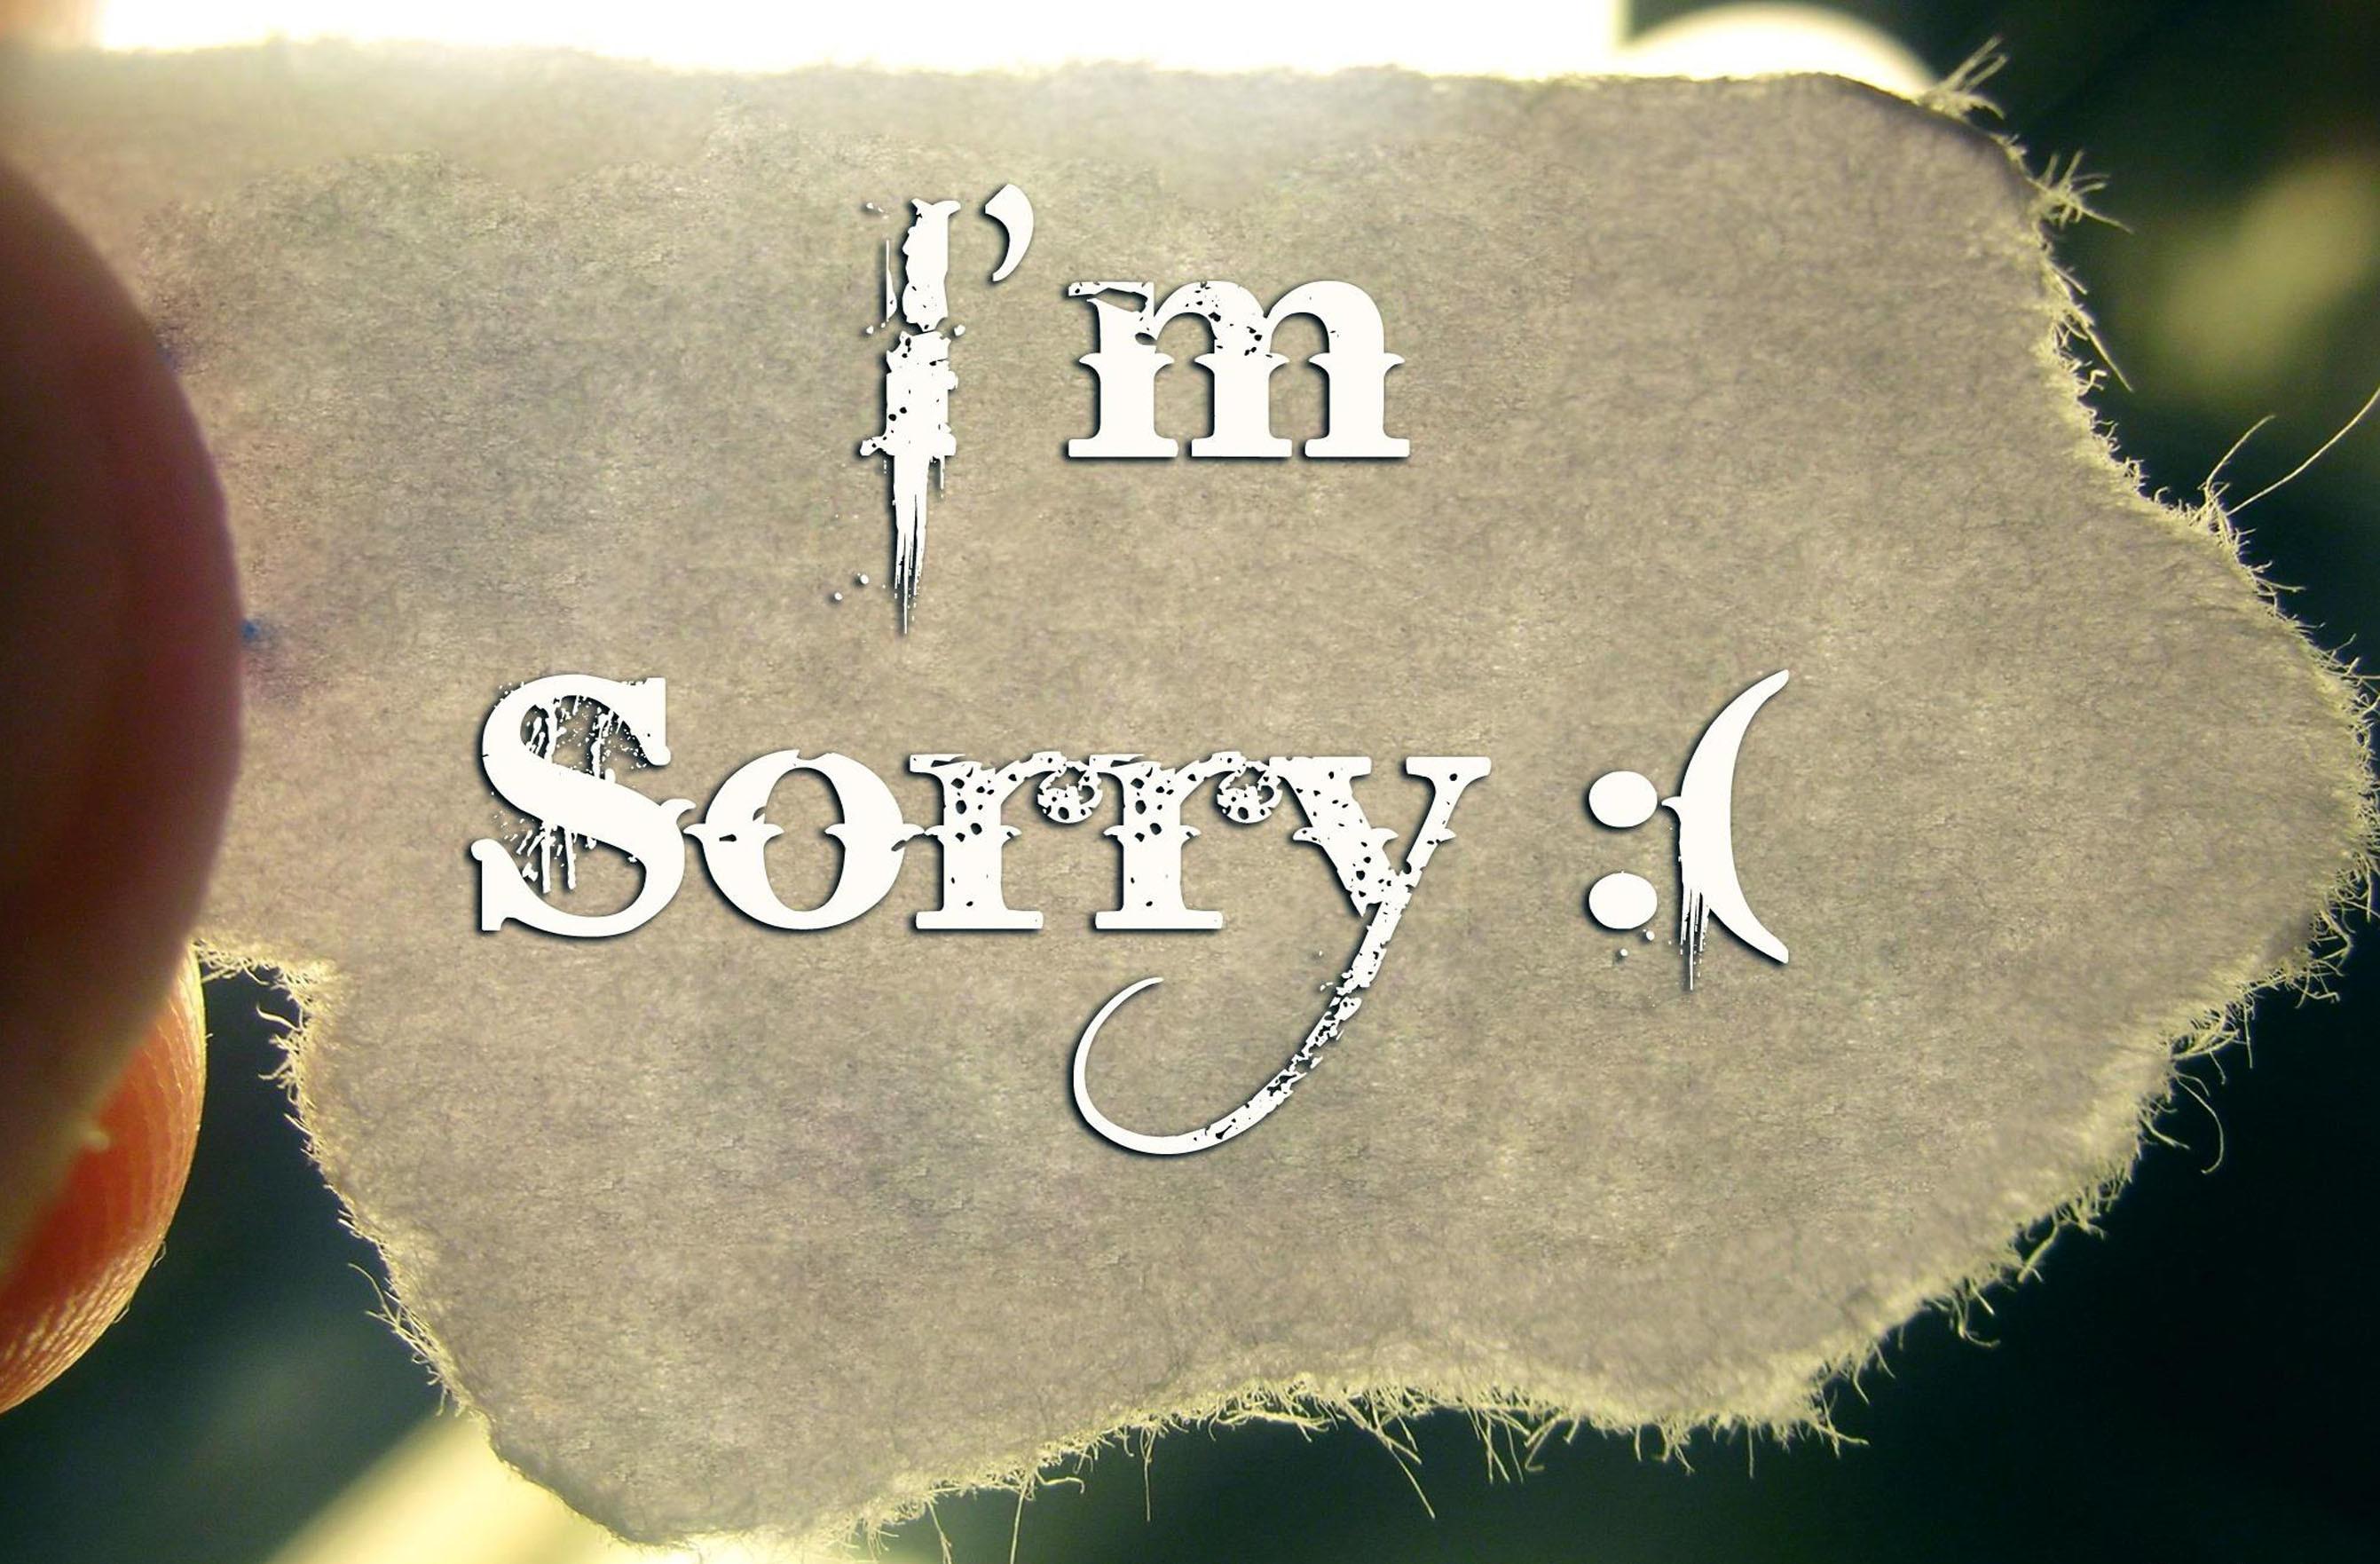 Sorry Wallpaper Hd - Saying Sorry To My Love - 2682x1762 Wallpaper -  